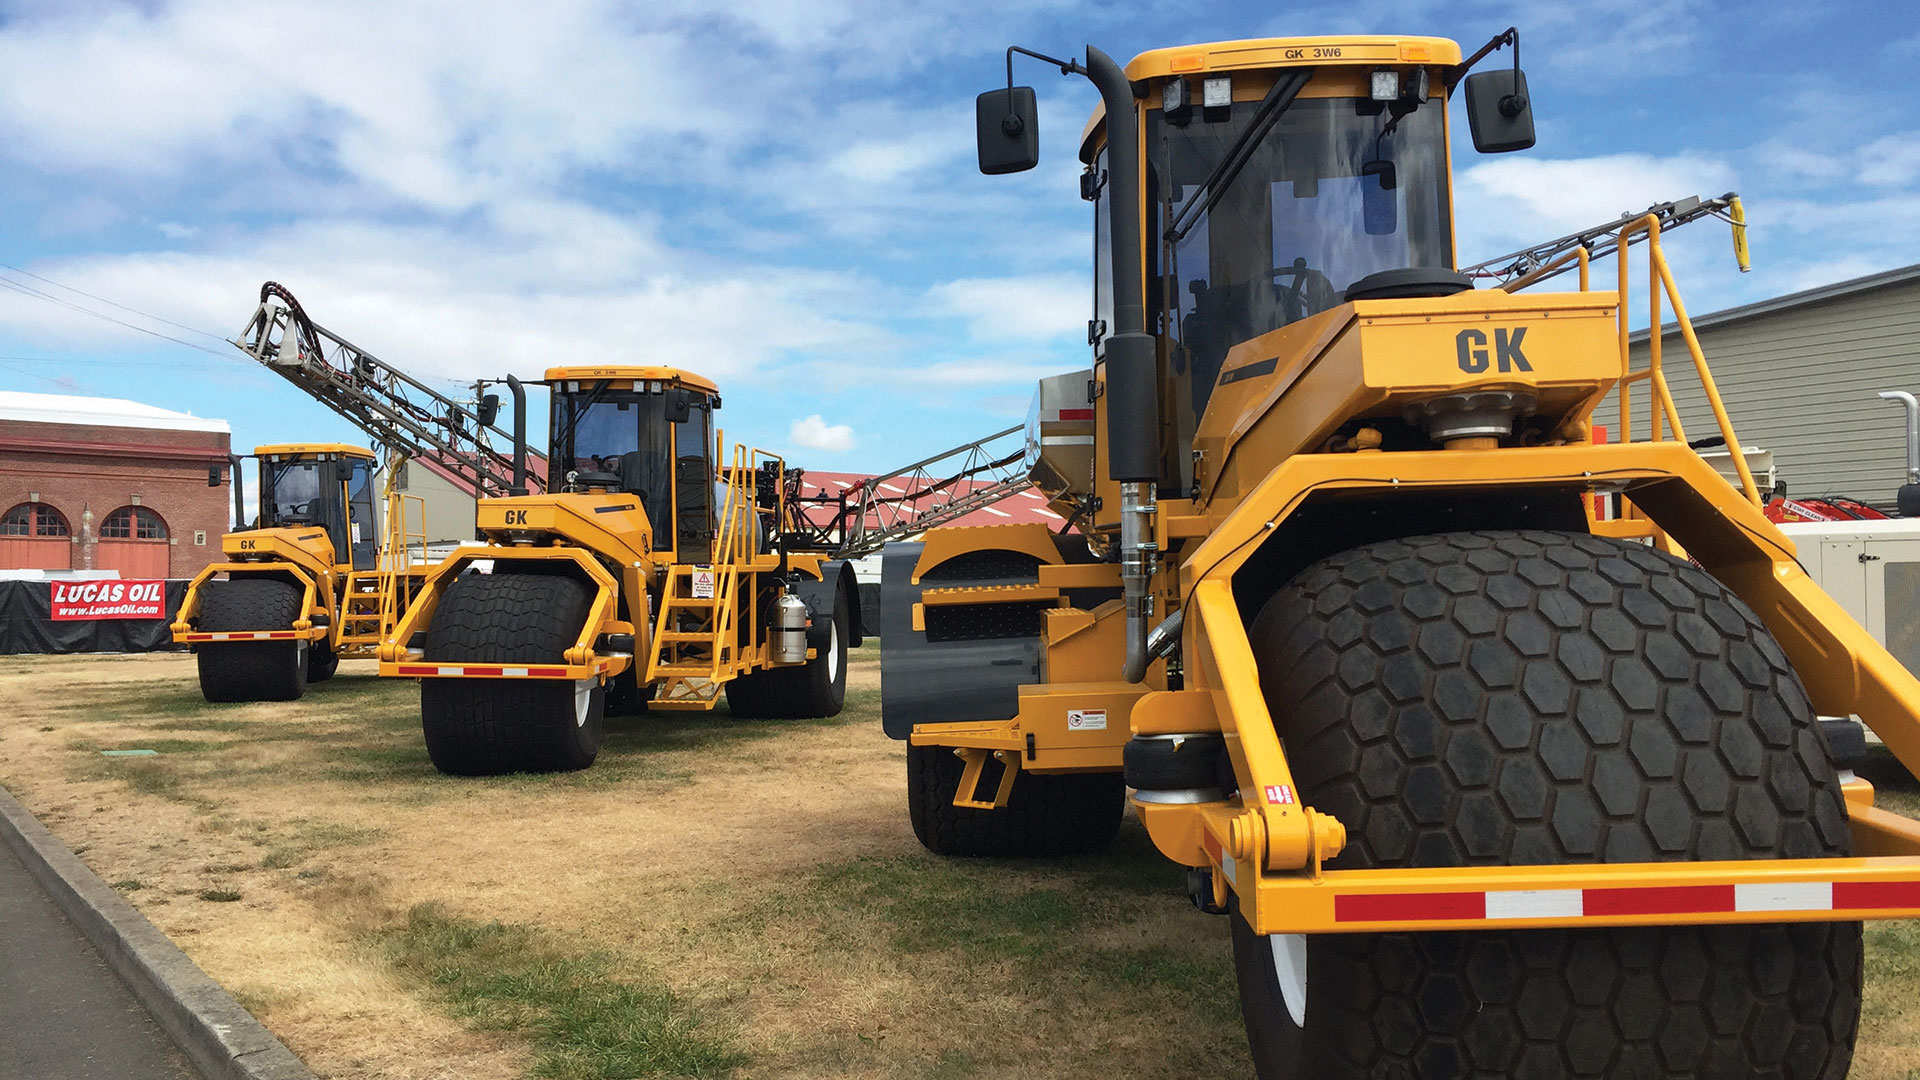 The GK 3W6 Sprayer was featured at the Oregon State Fair. It has been updated with a more fuel-efficient engine and 200 percent stronger frame.